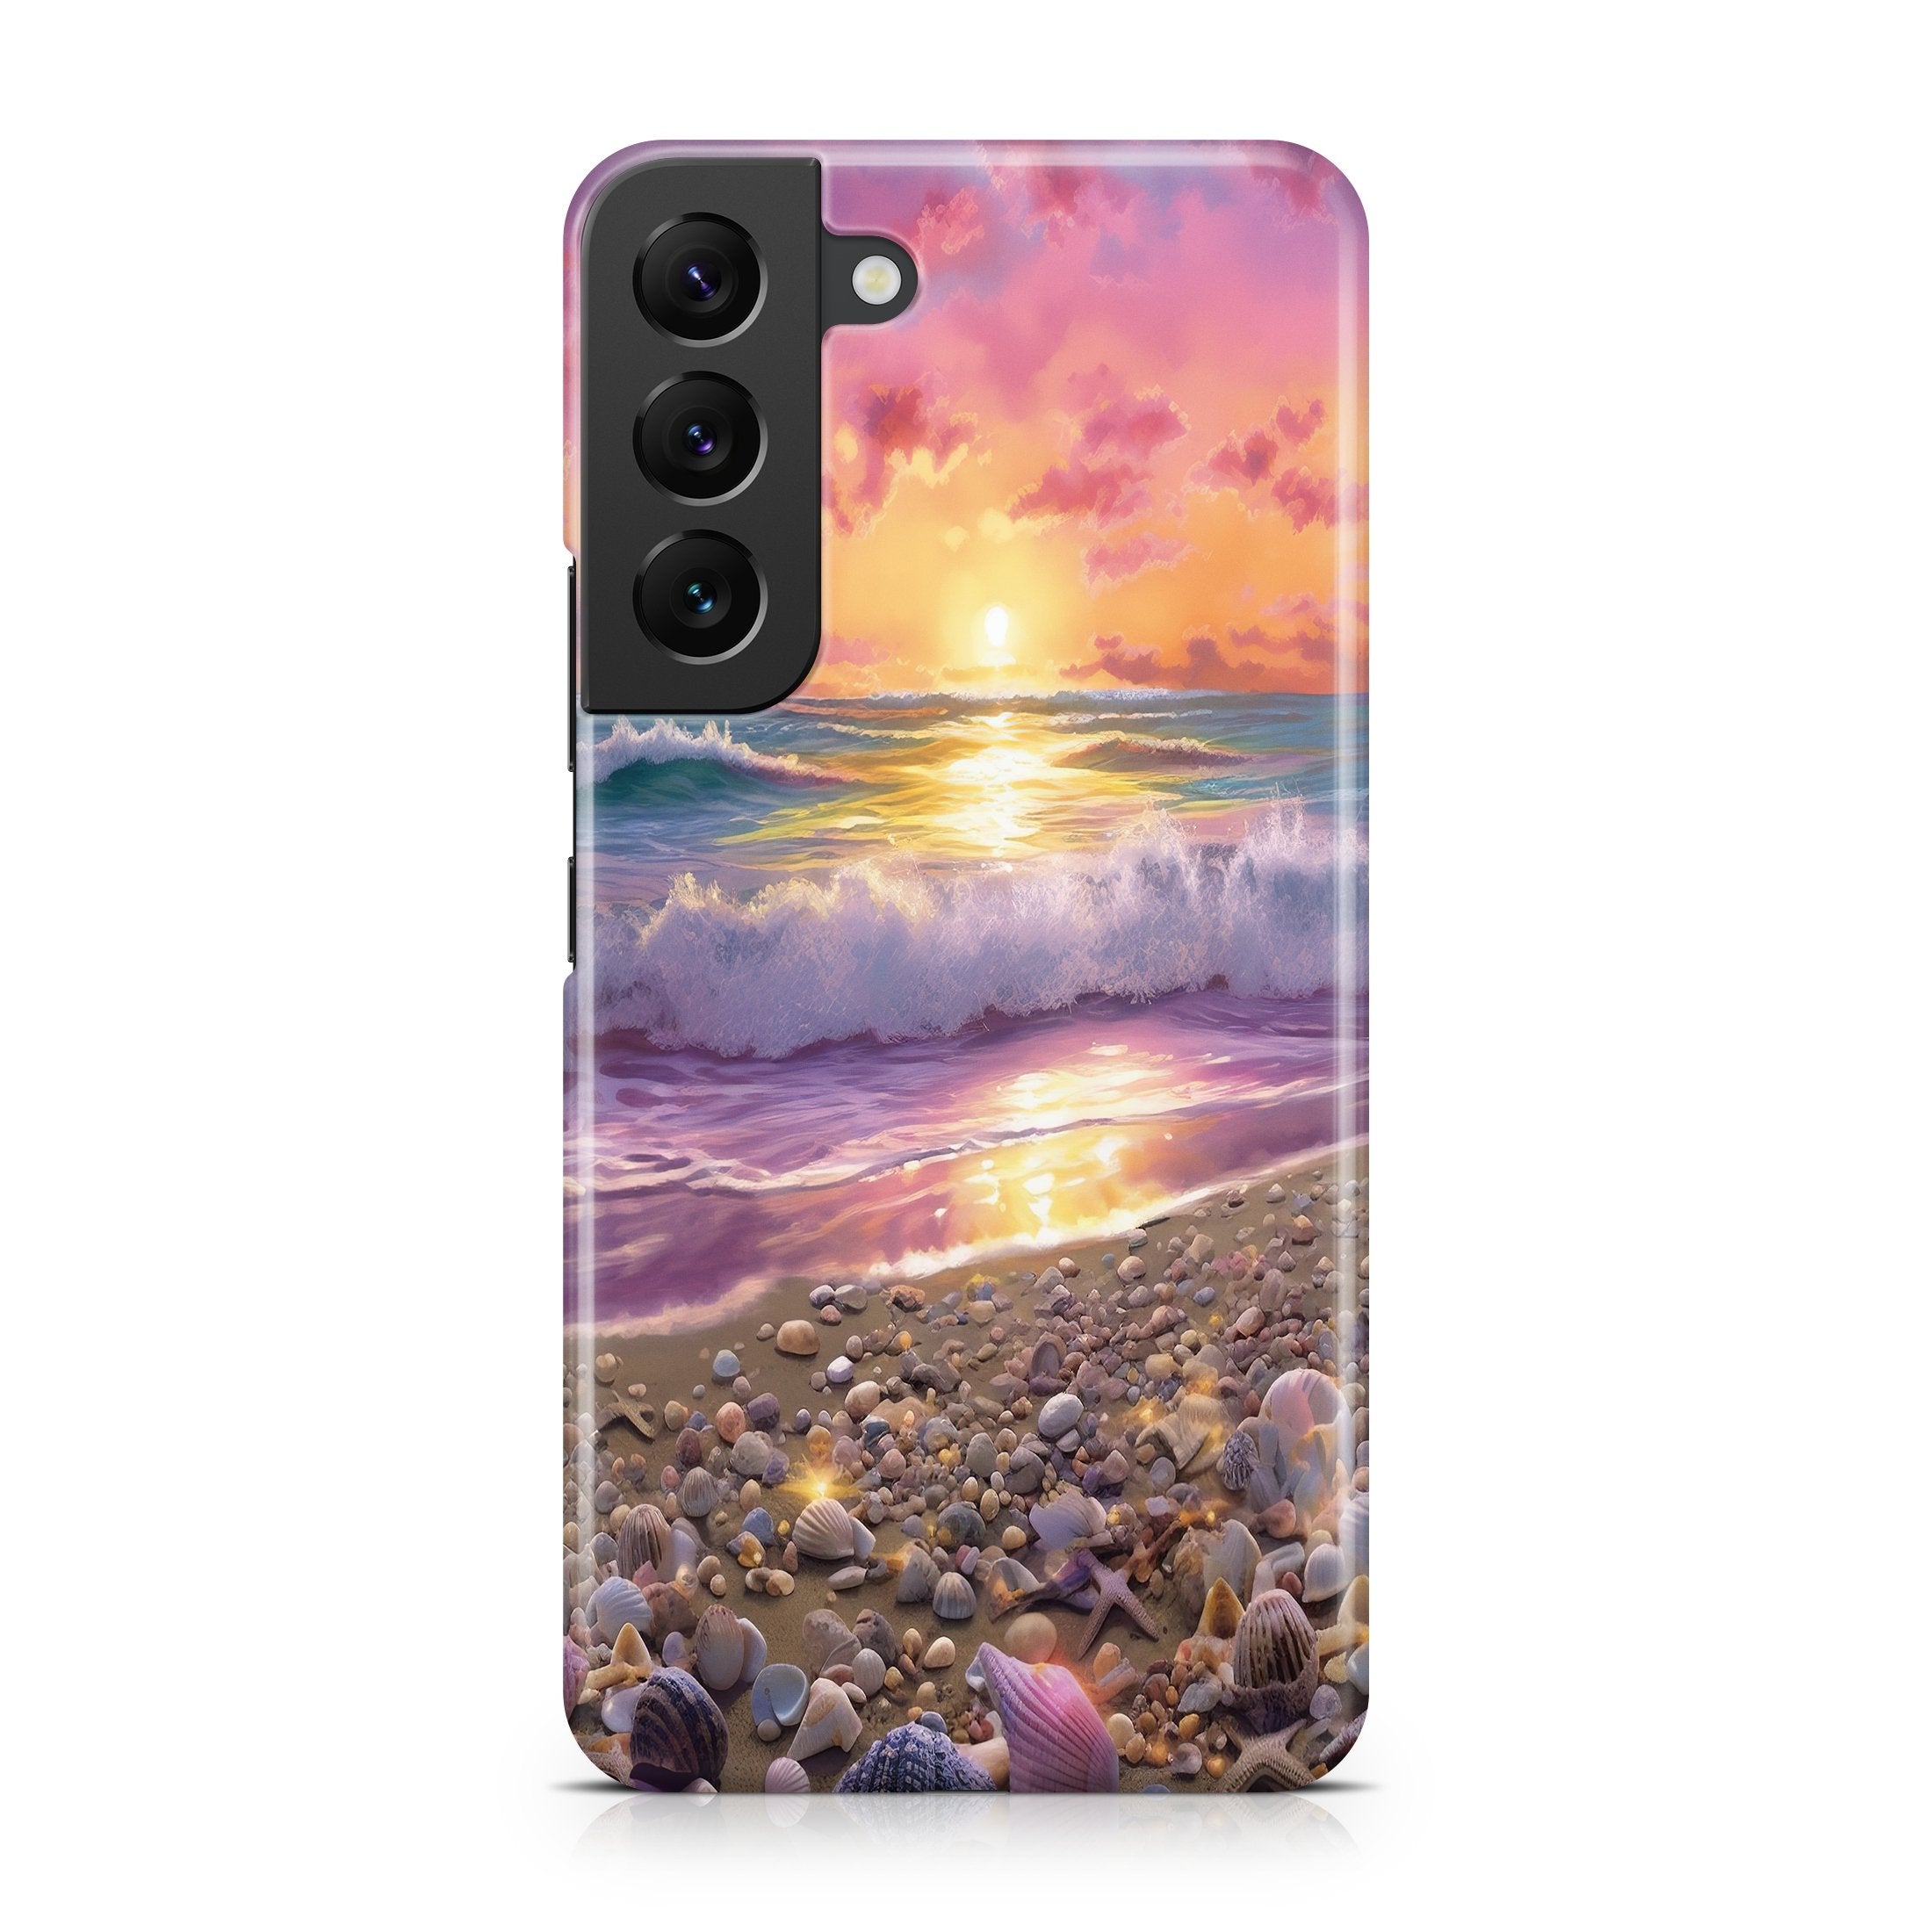 Summer Dreams - Samsung phone case designs by CaseSwagger